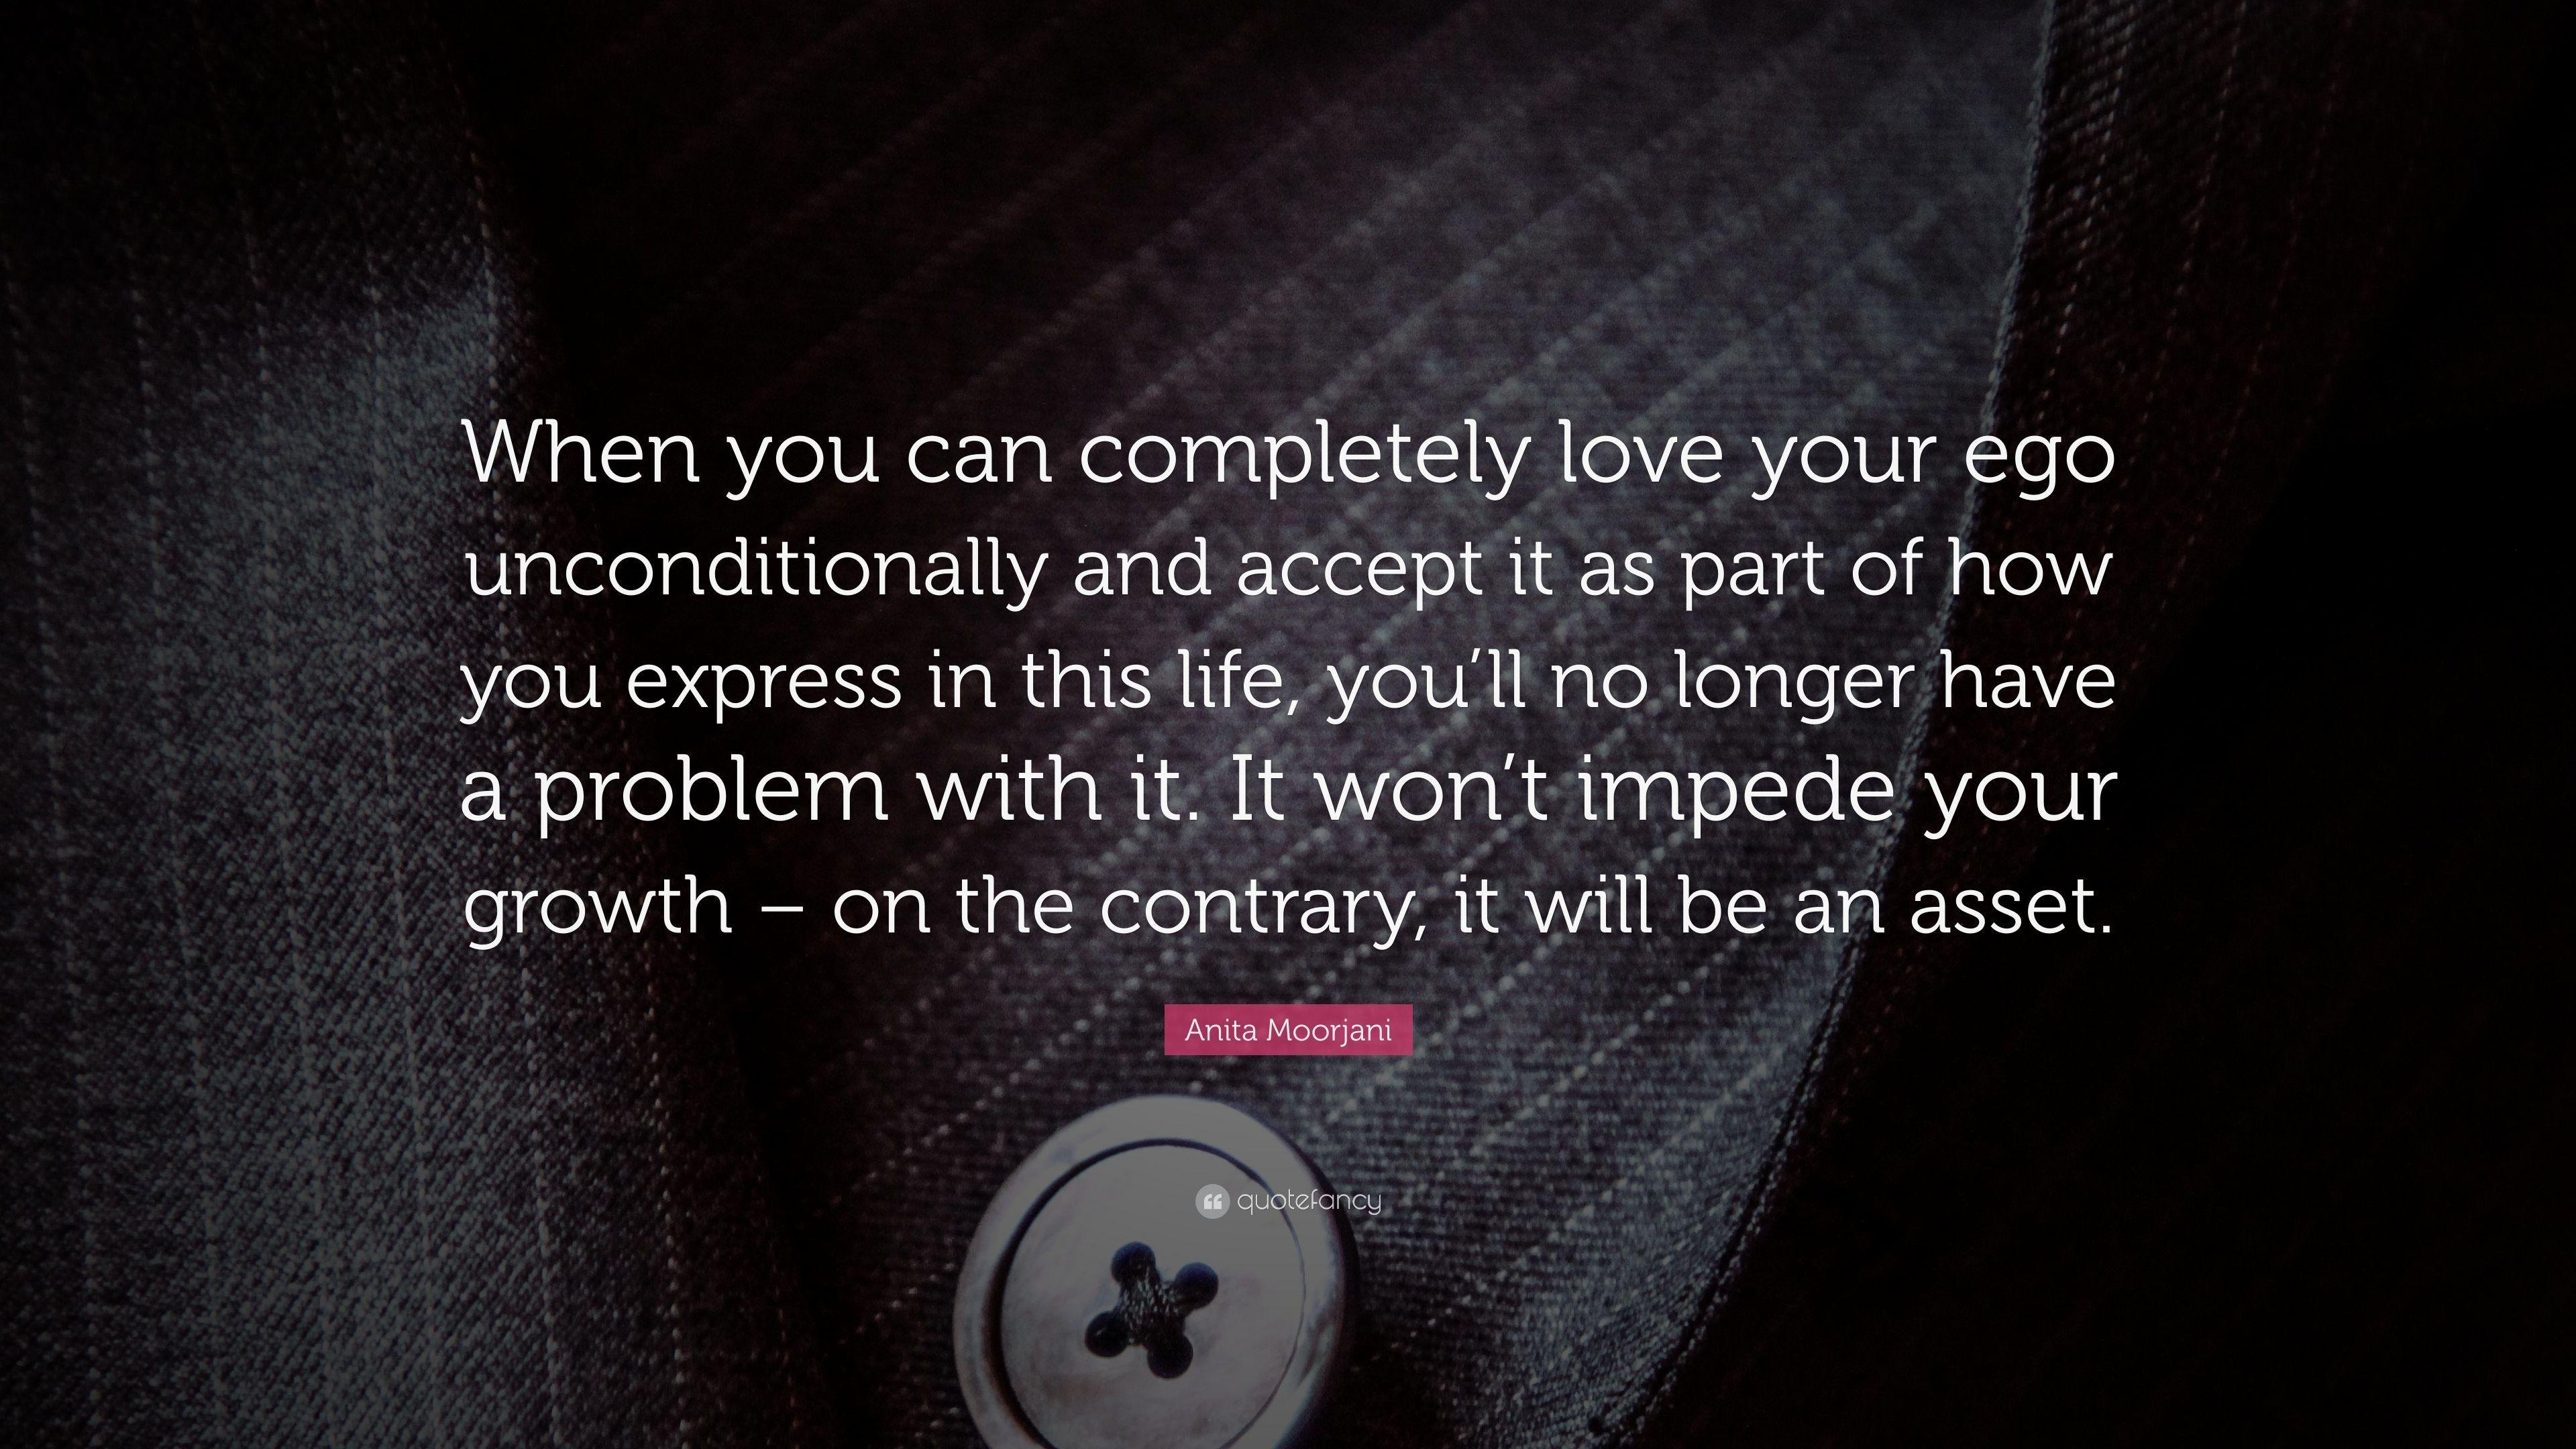 Anita Moorjani Quote: “When you can completely love your ego